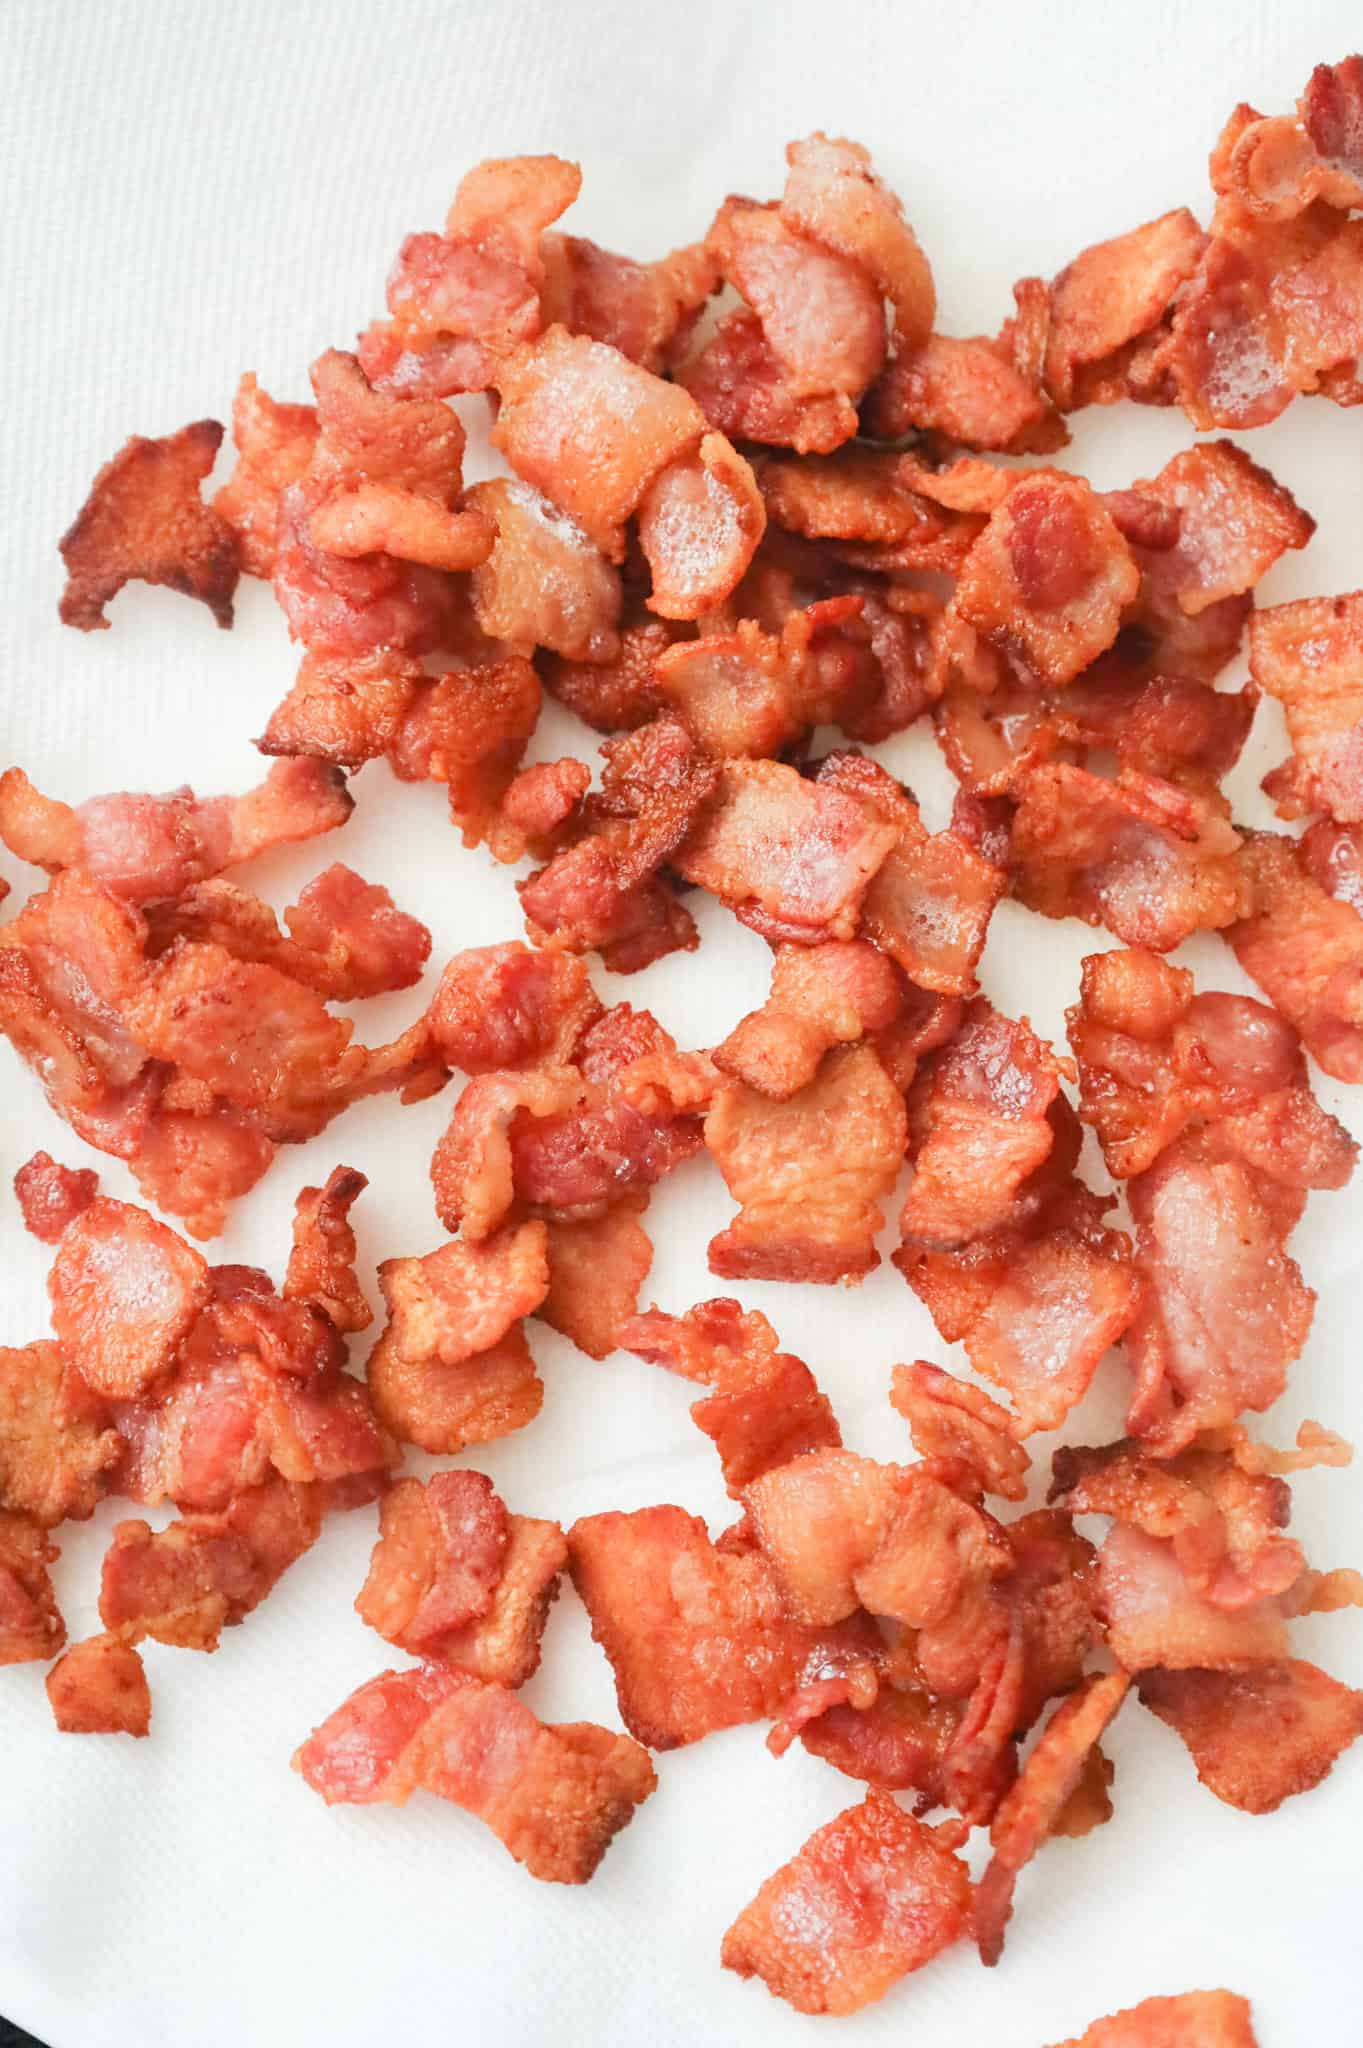 cooked bacon pieces on a plate